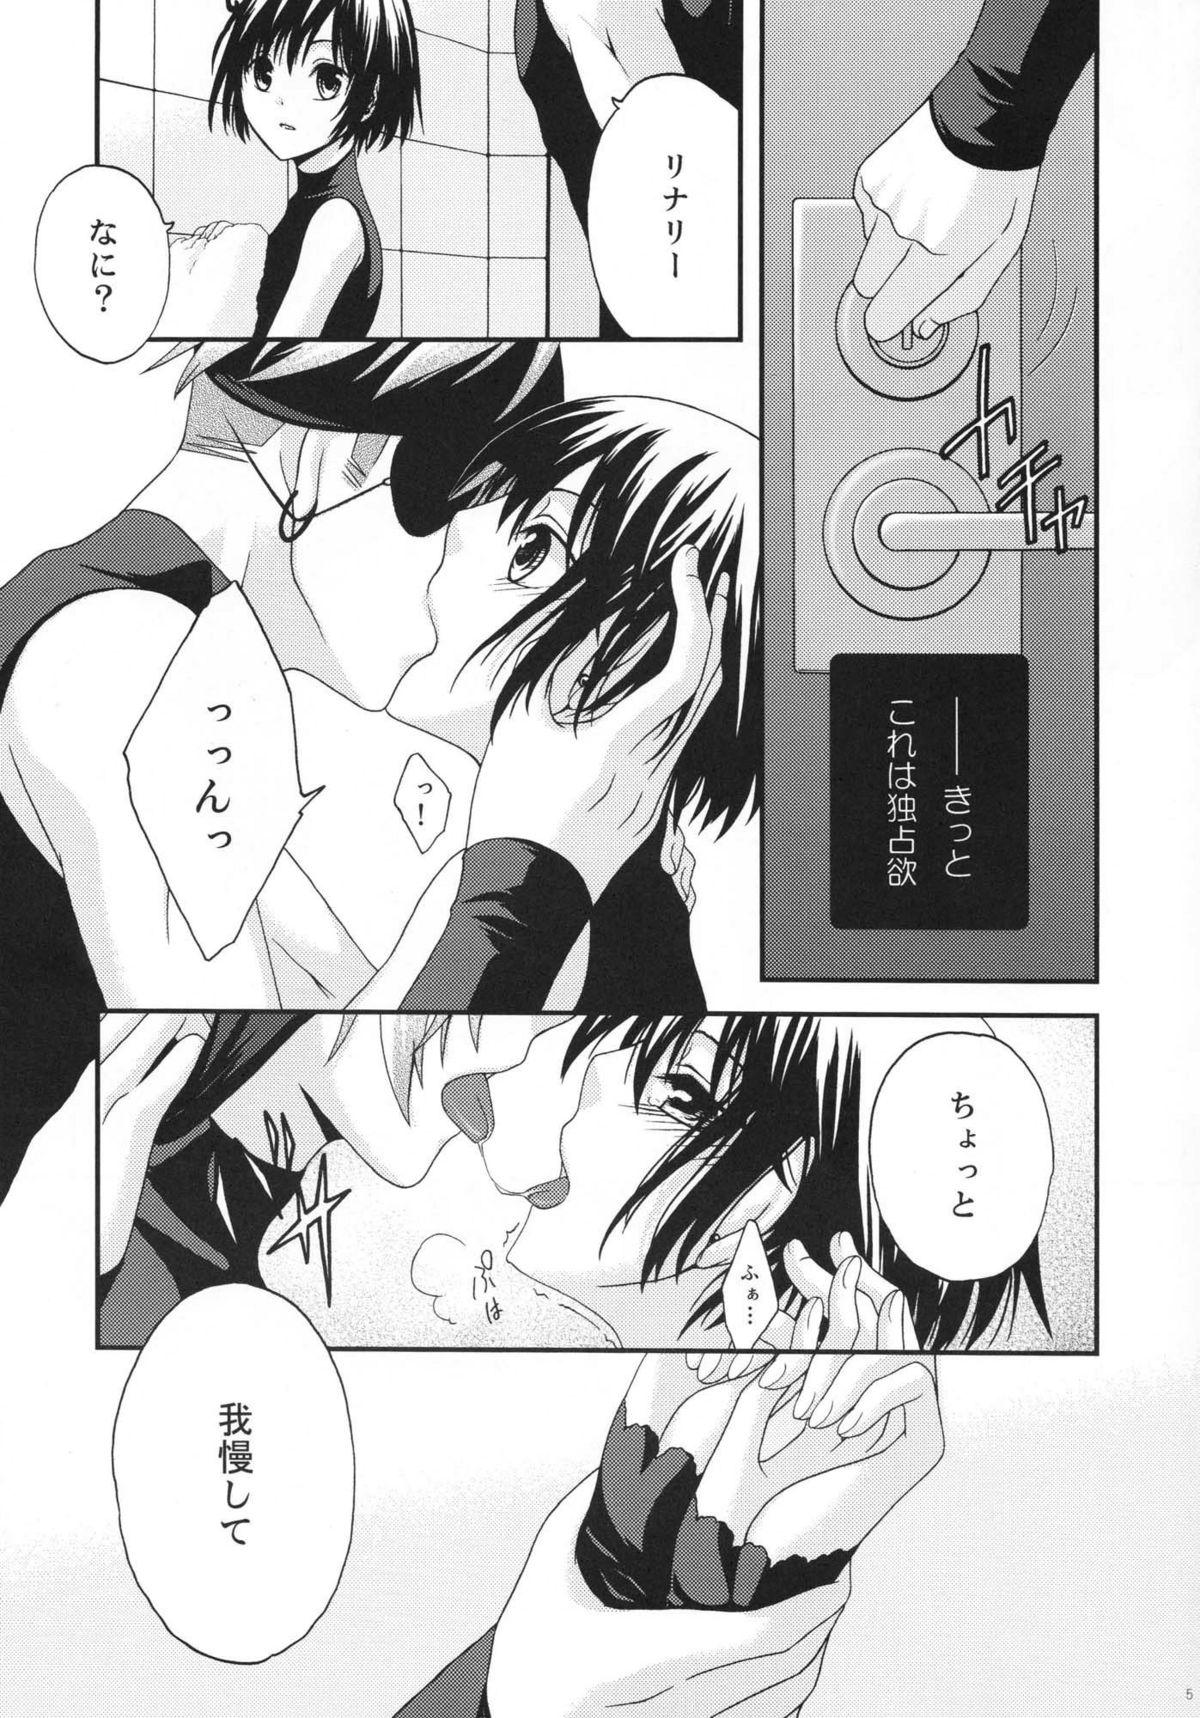 Butts Active Heart - D.gray-man Asstomouth - Page 4